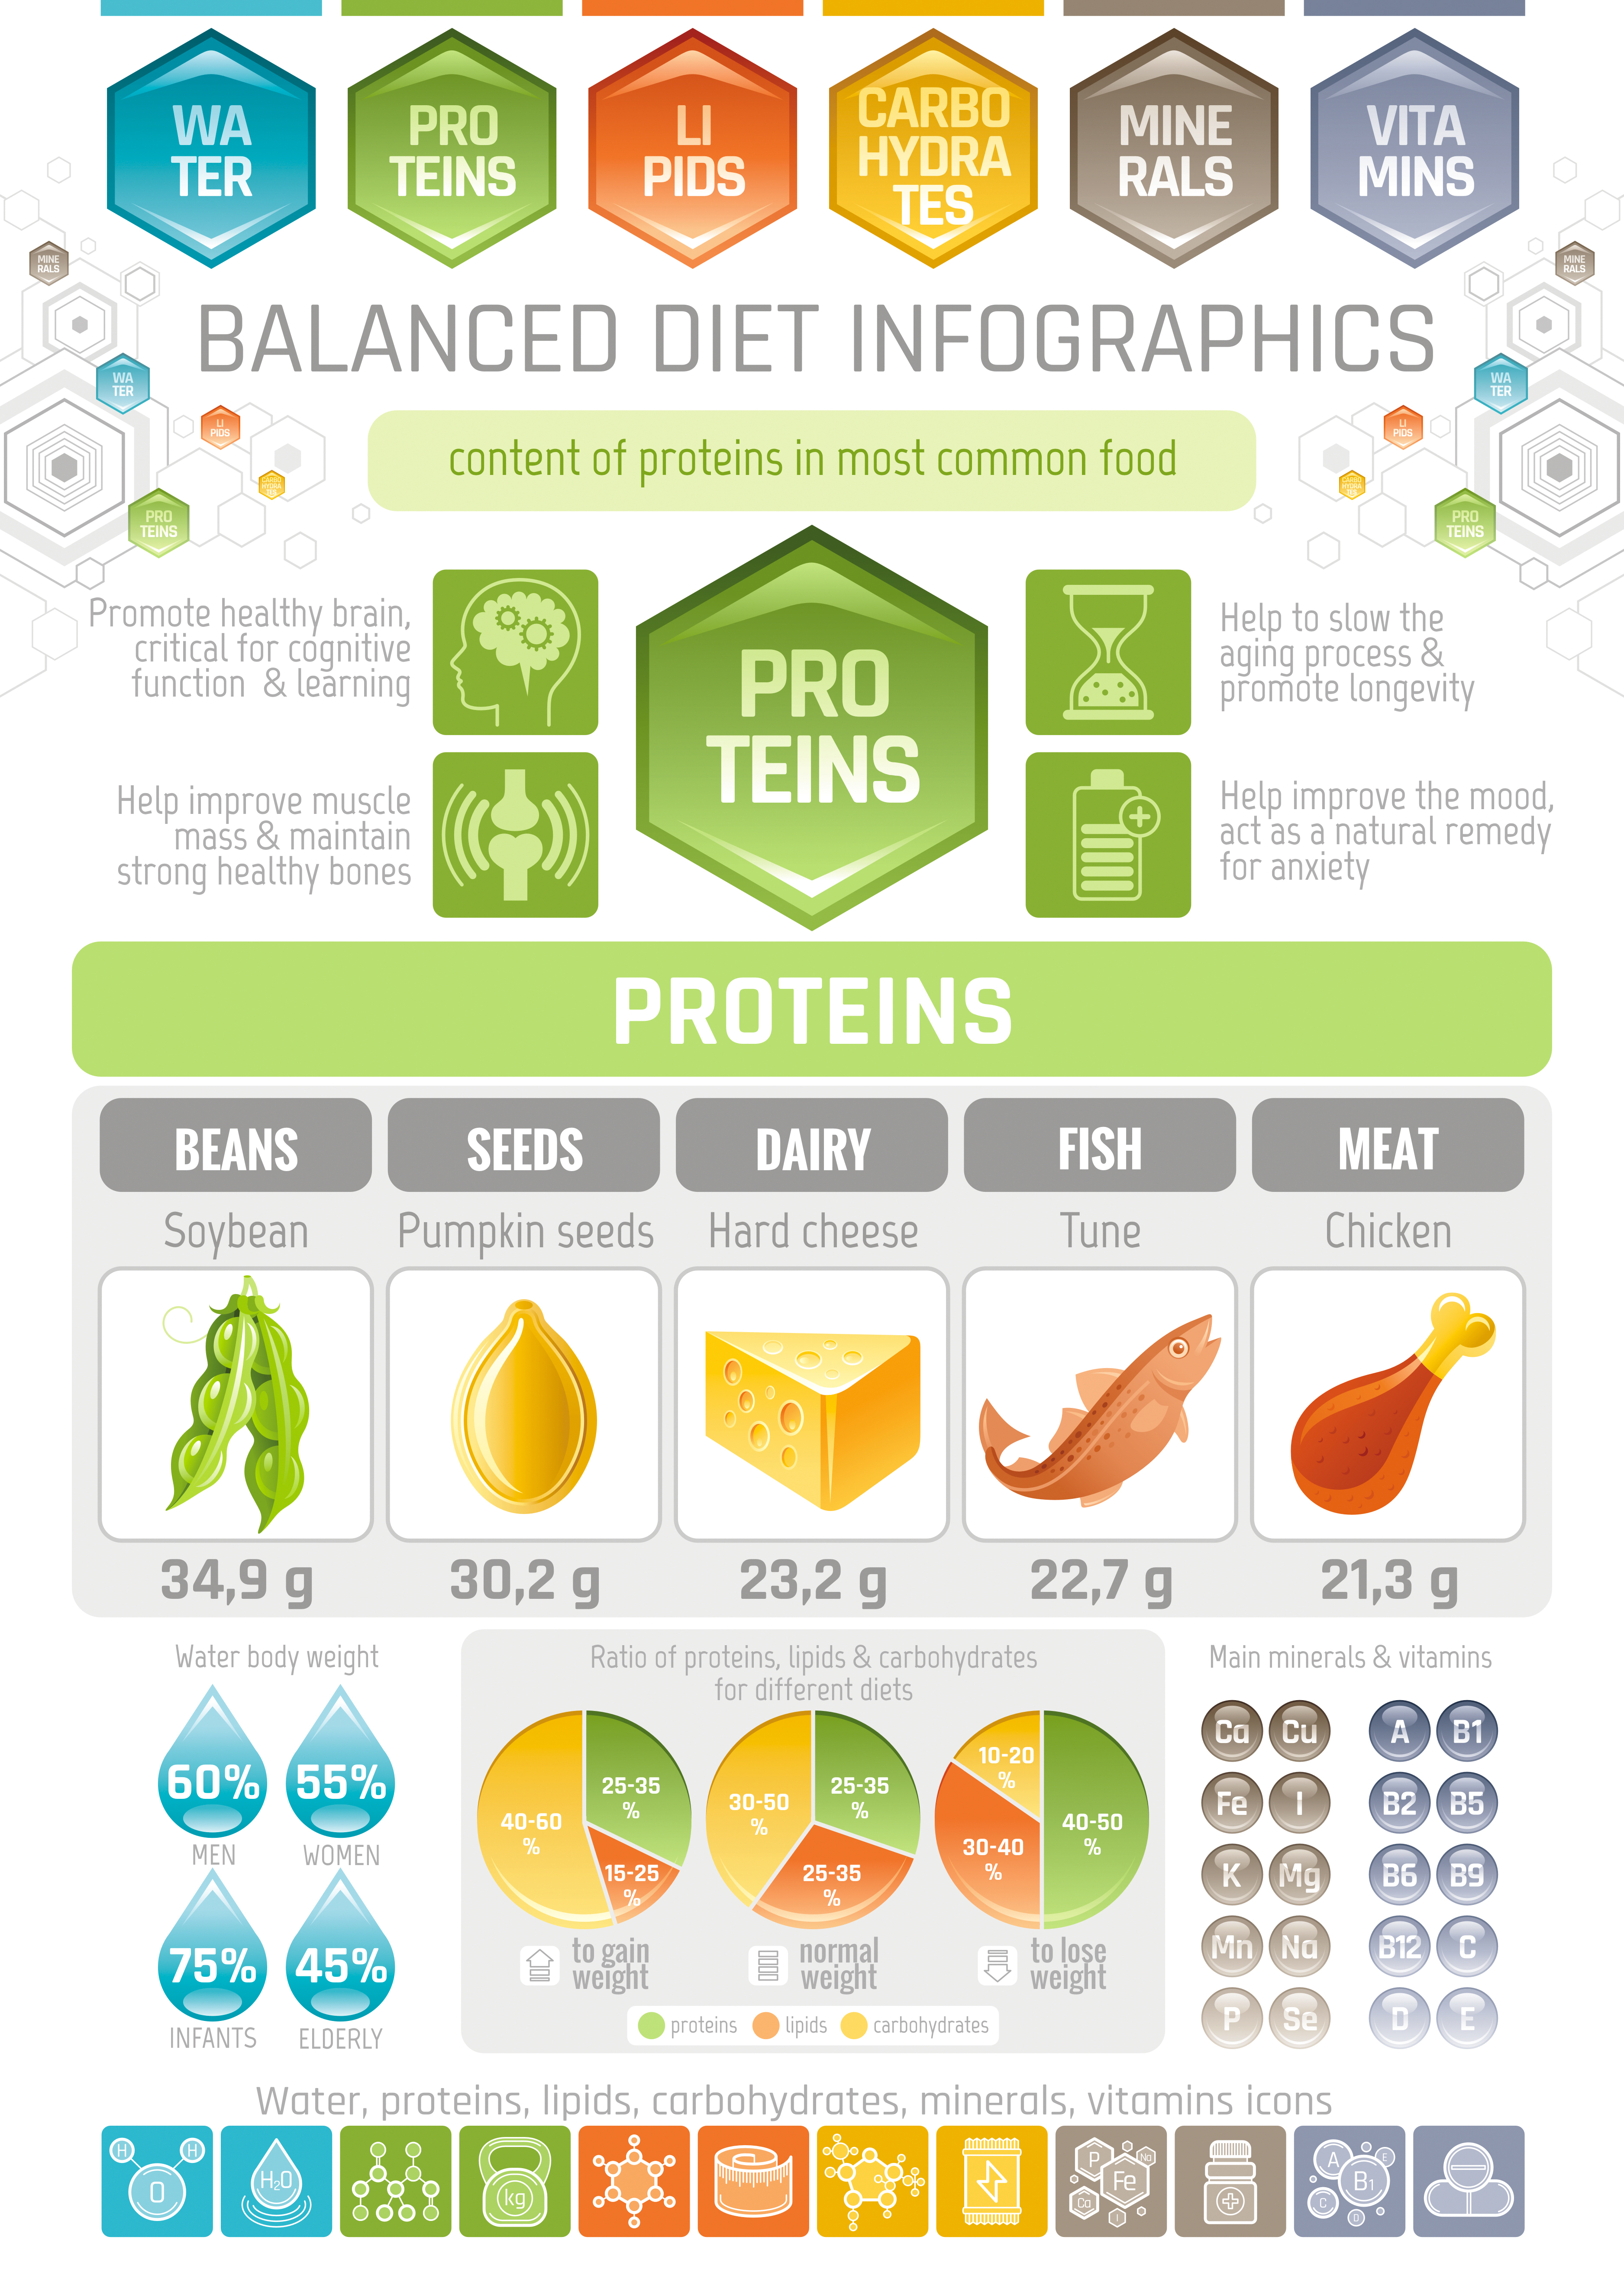 Proteins - benefits and sources - infographic